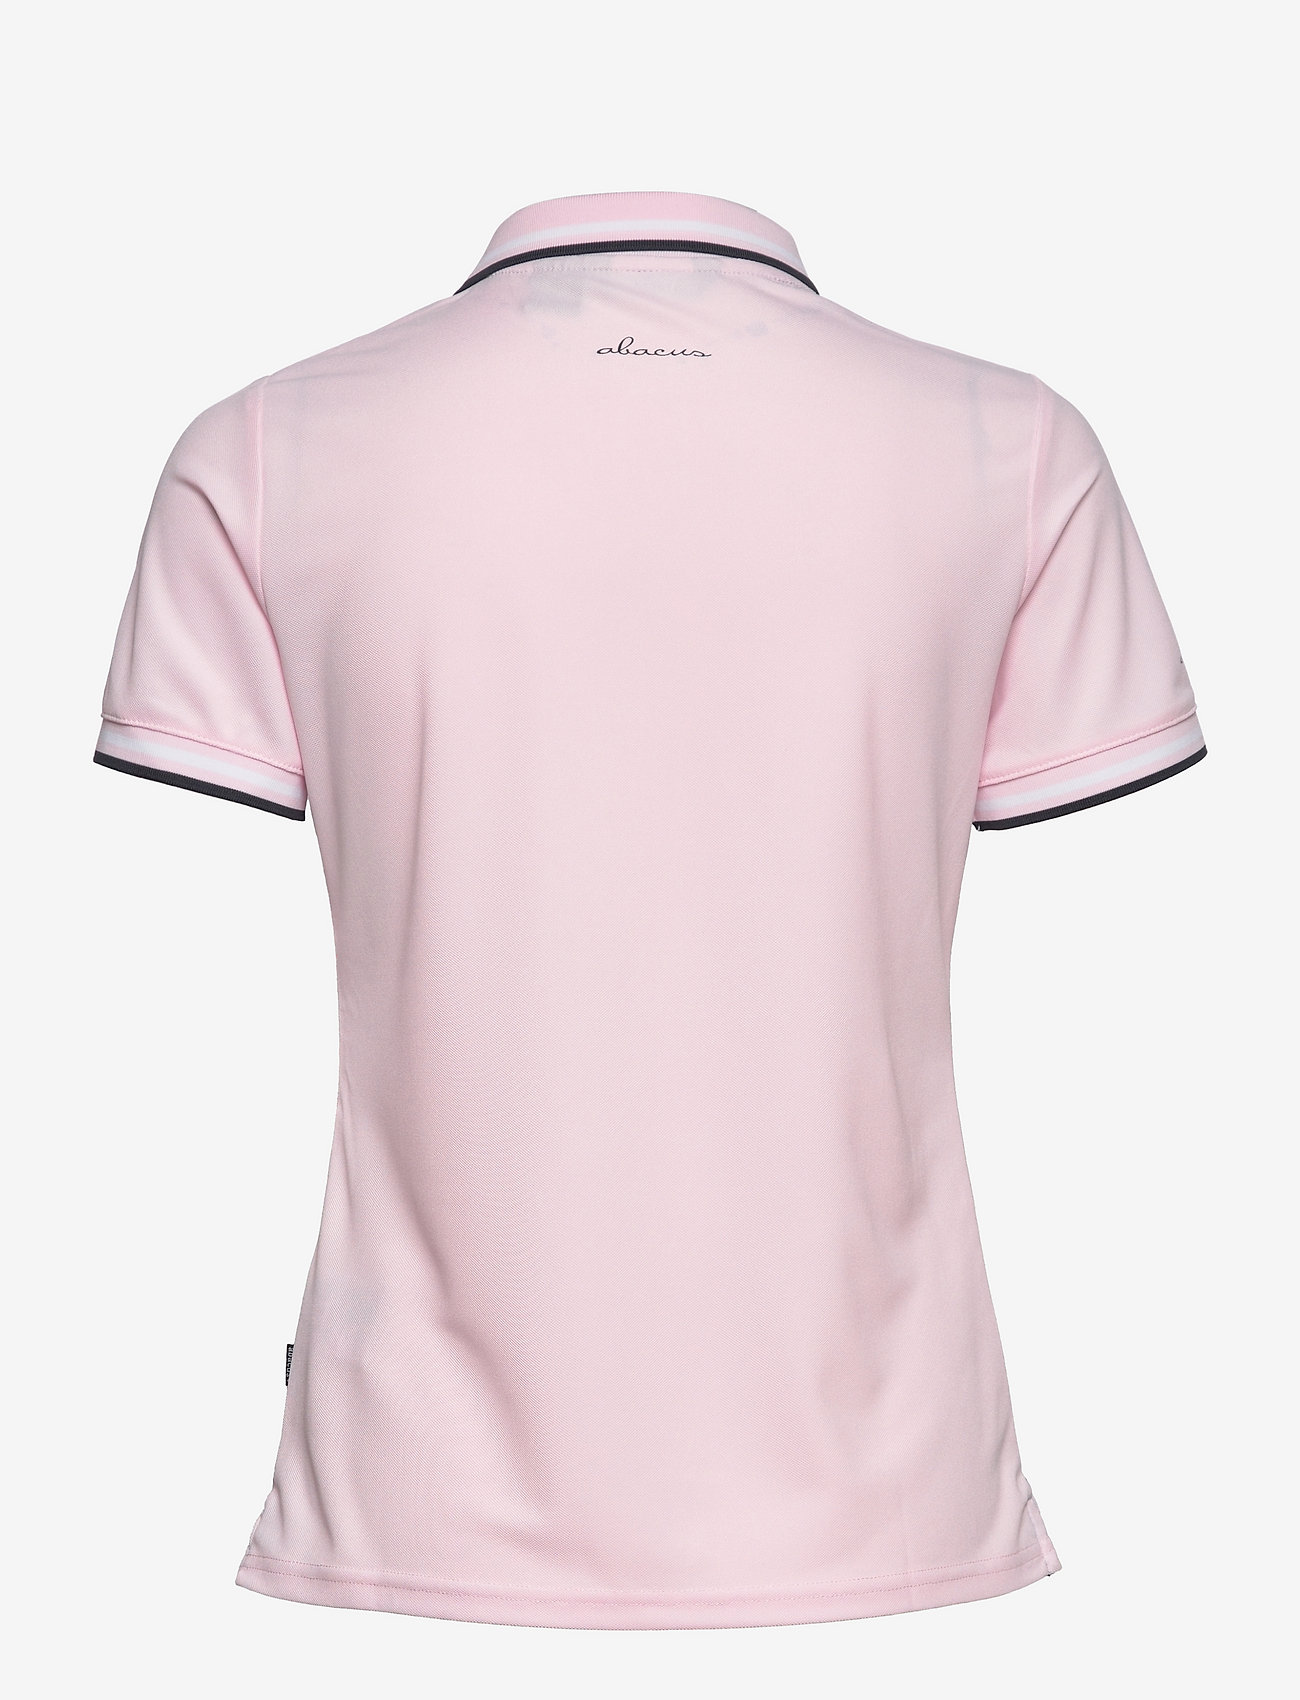 Abacus - Lds Pines polo - tops & t-shirts - lt.pink - 1